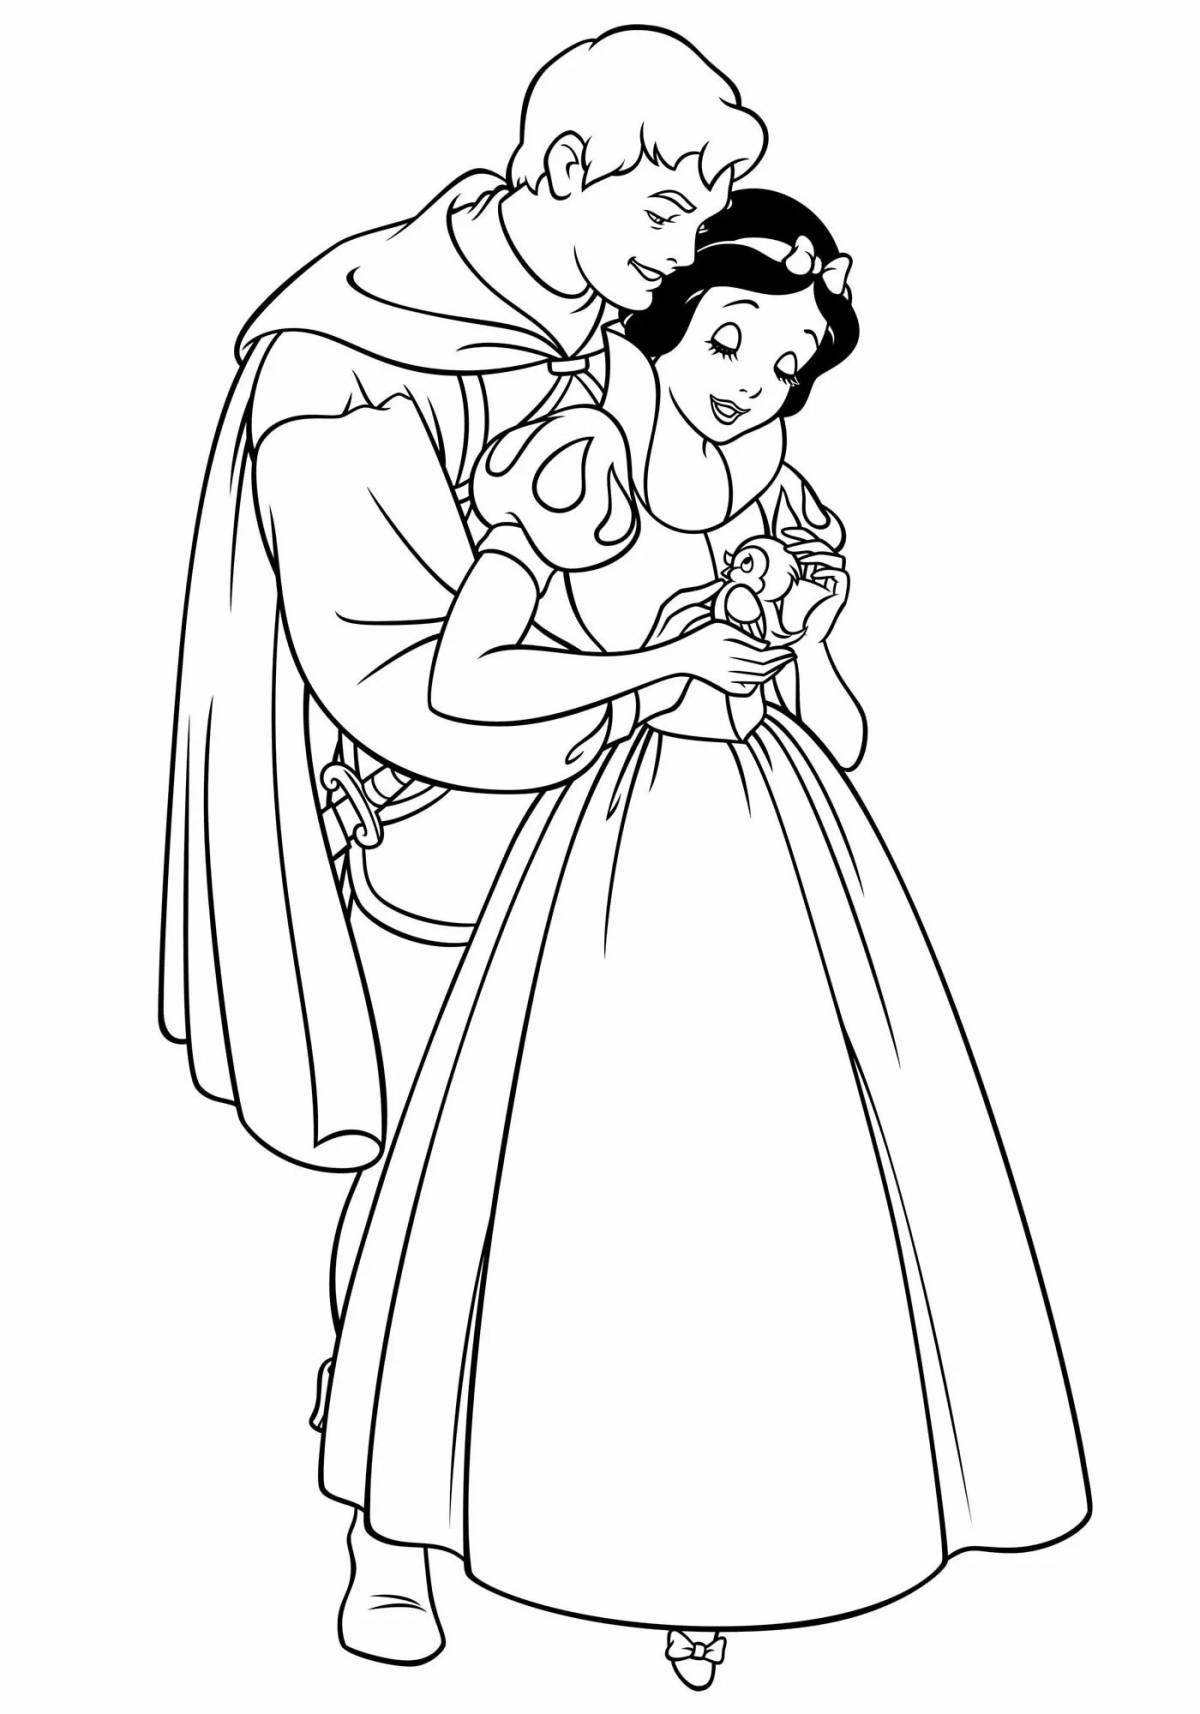 Adorable princess and prince coloring book for kids